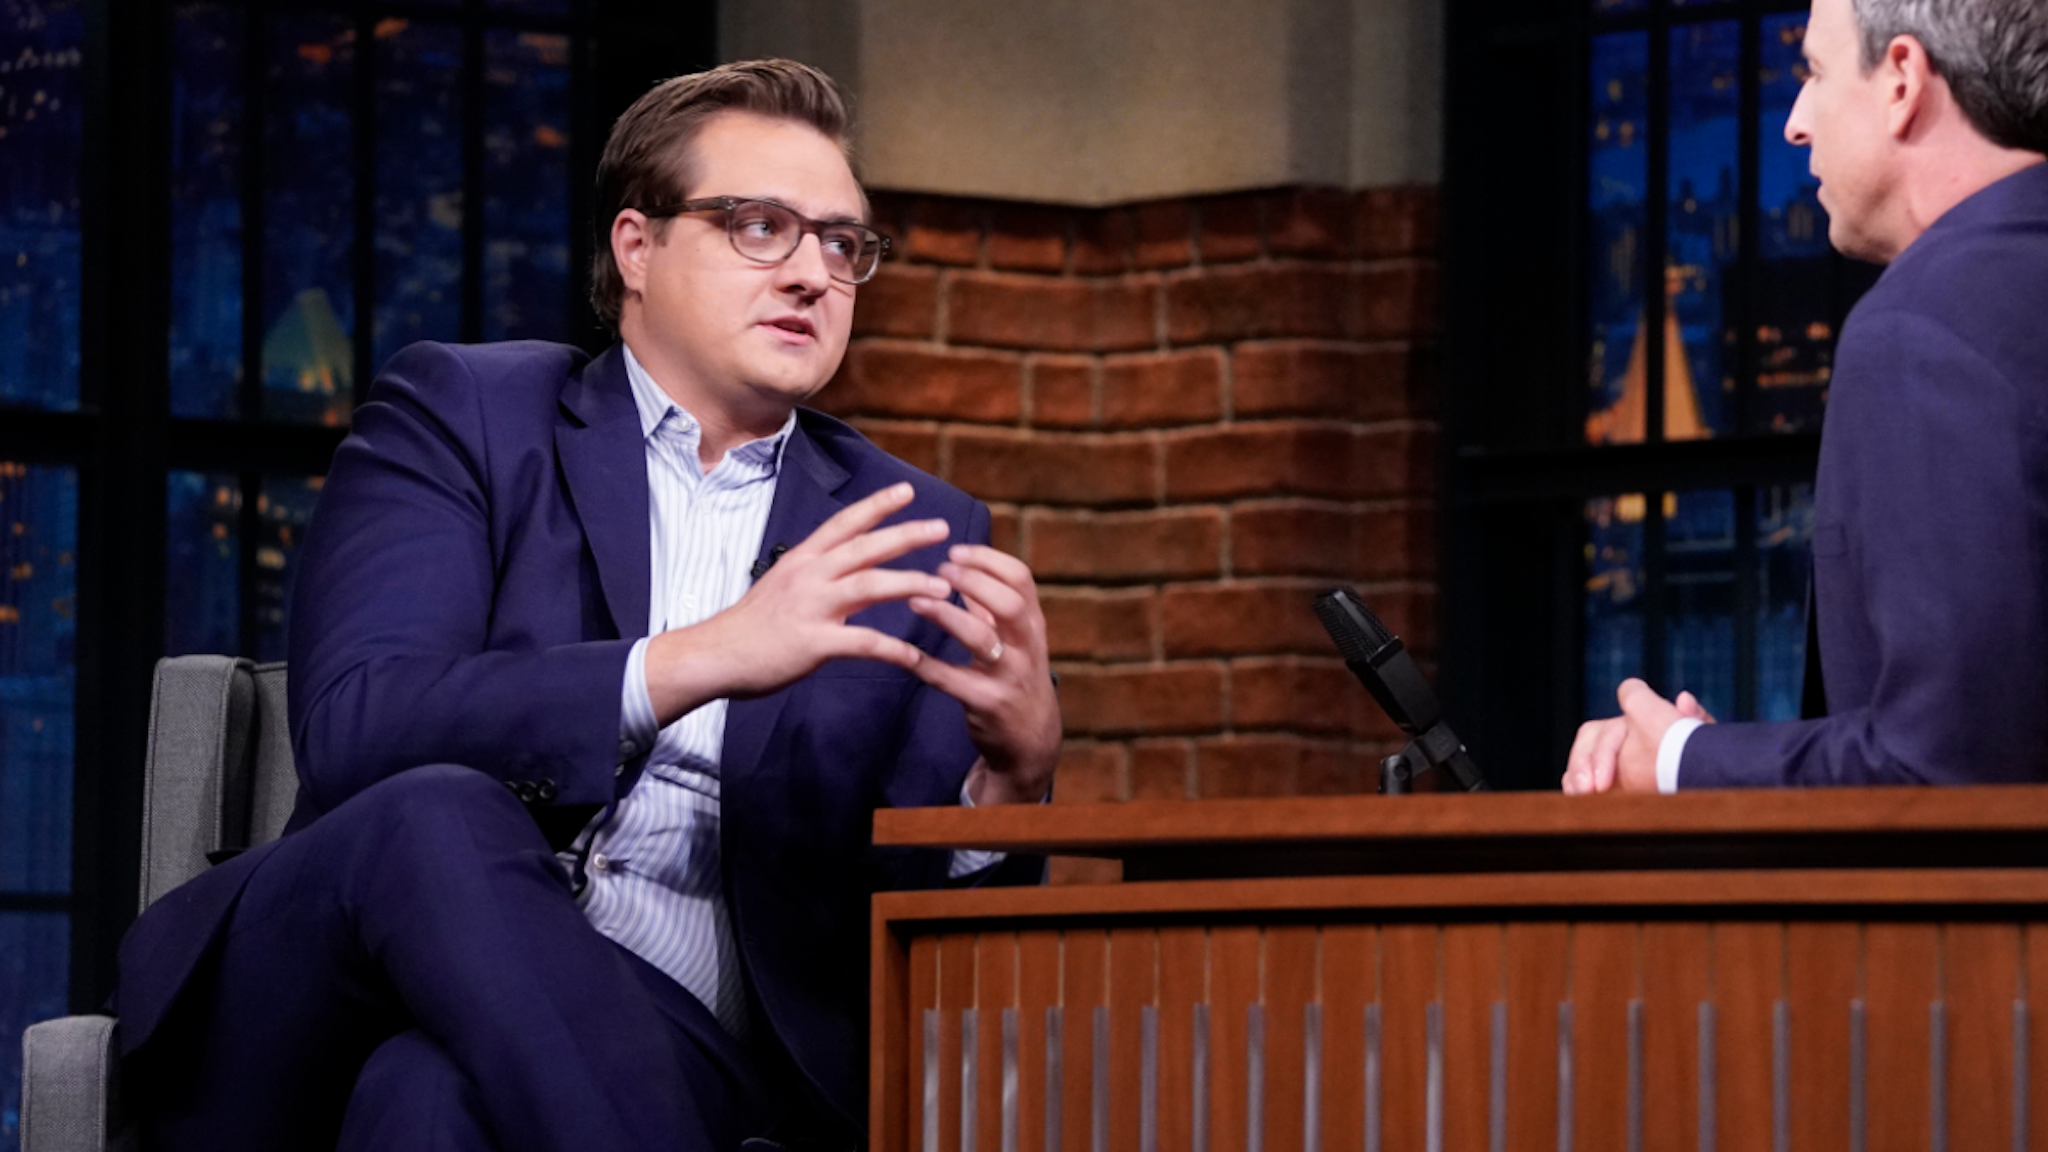 LATE NIGHT WITH SETH MEYERS -- Episode 891 -- Pictured: (l-r) MSNBCs Chris Hayes during an interview with host Seth Meyers on September 30, 2019 --